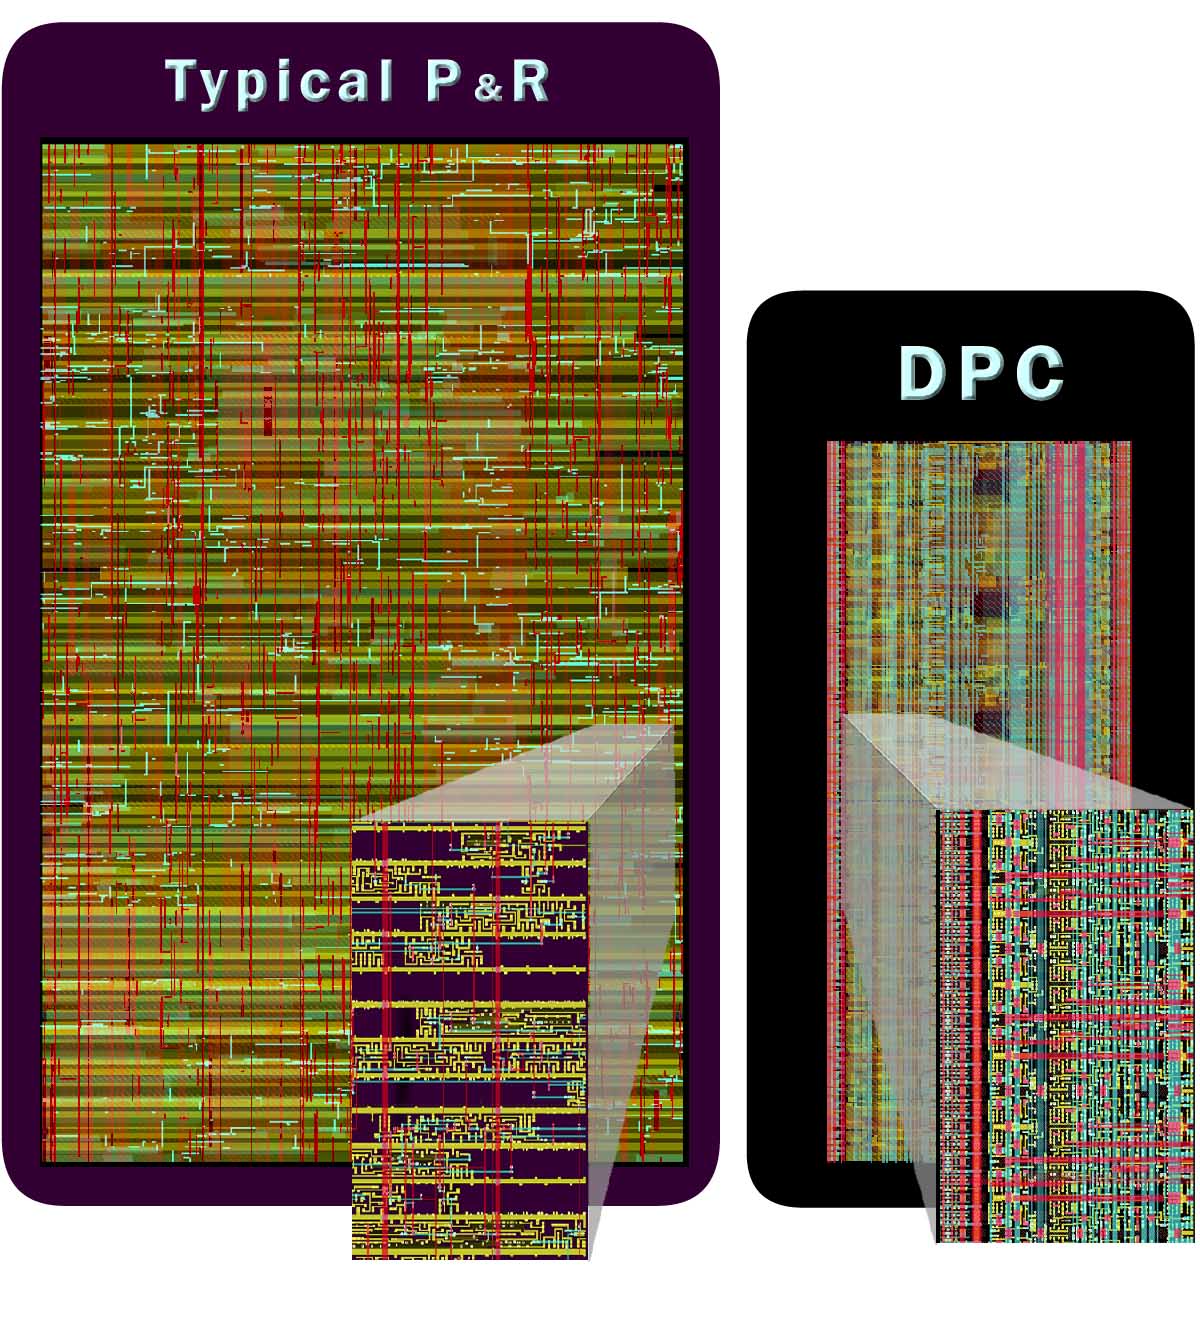 DPC side-by-side results